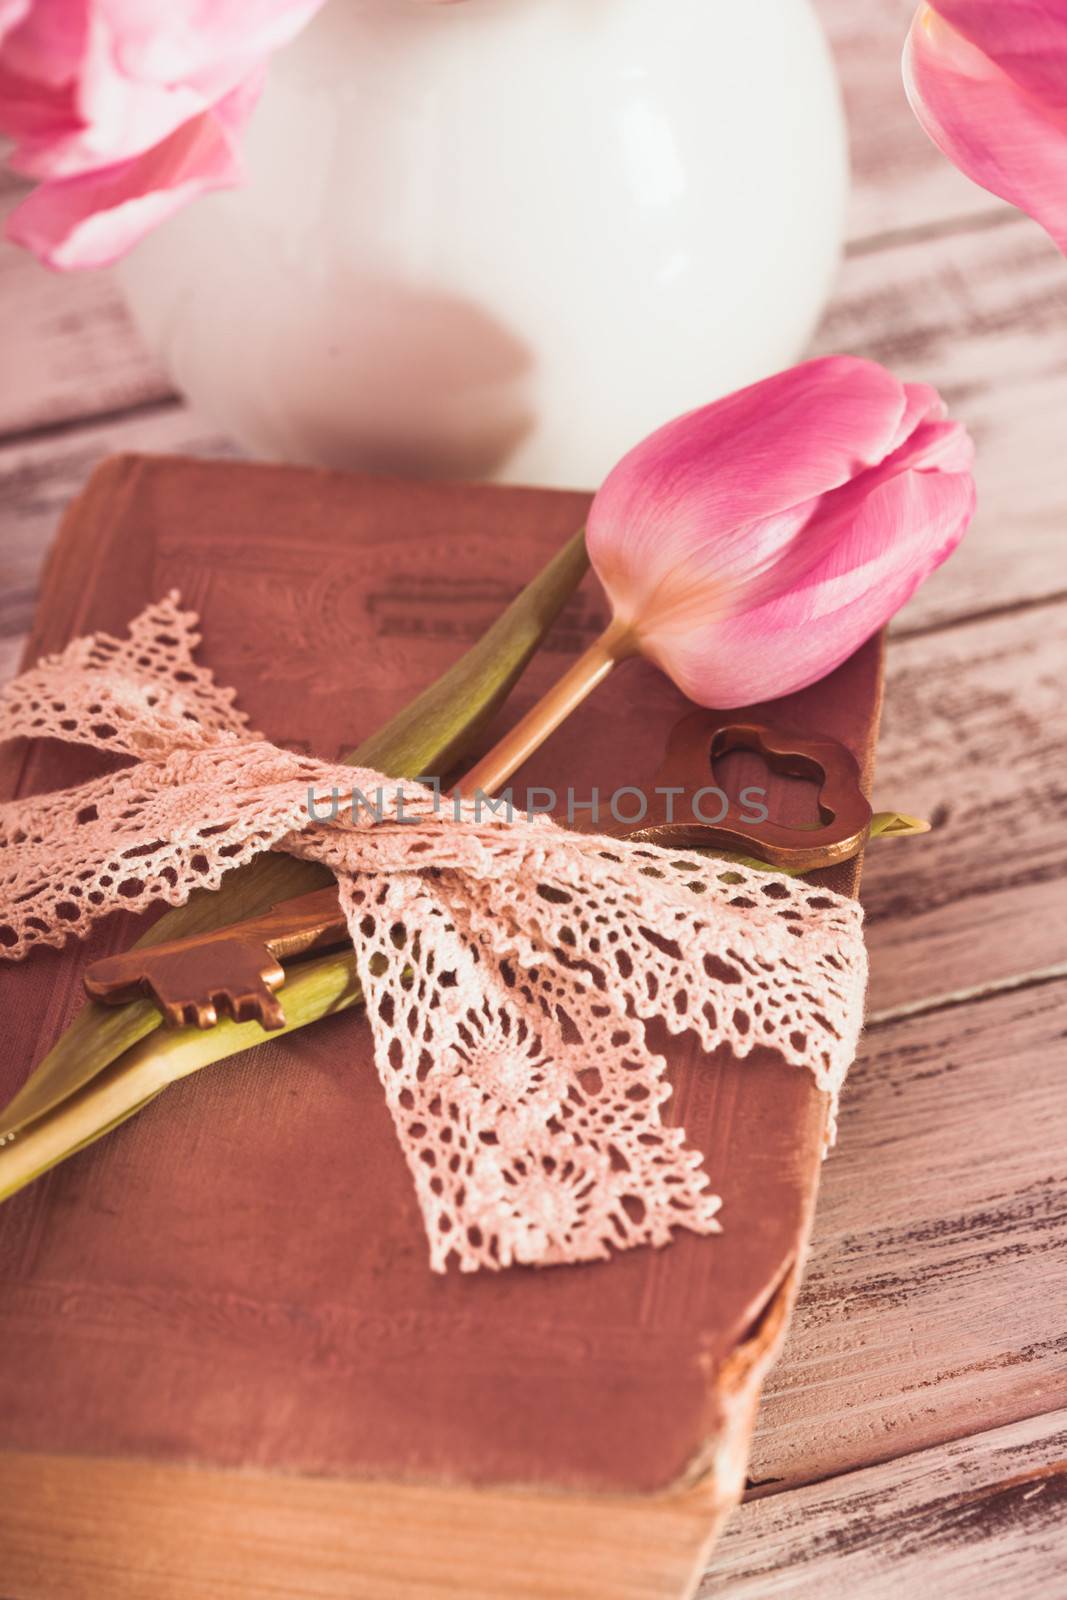 Memo still life with book, key, vintage lace and pink tulips